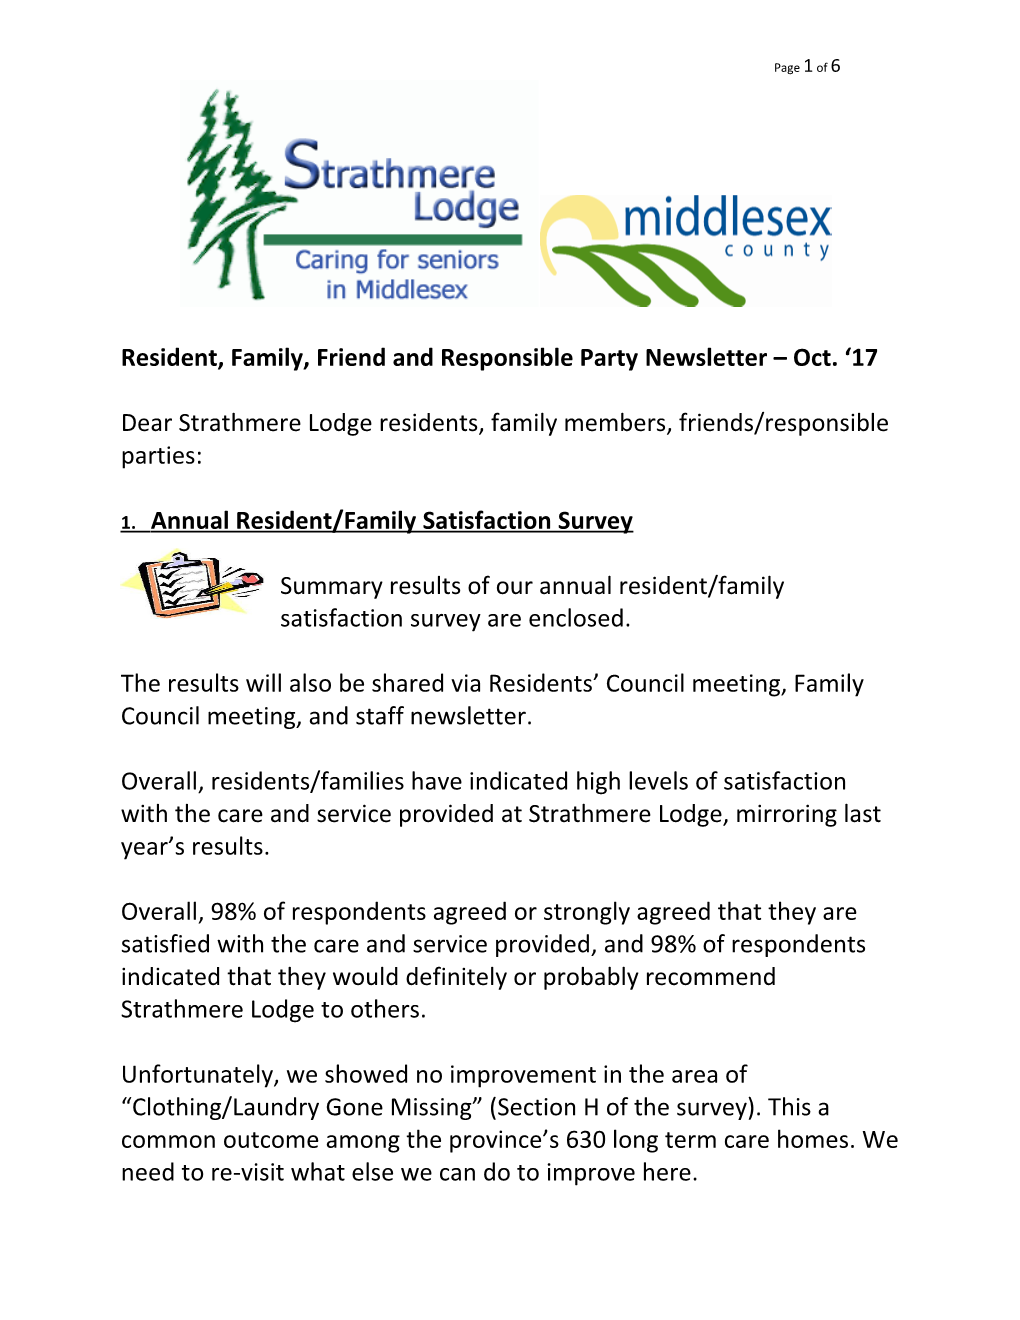 Resident, Family, Friend and Responsiblepartynewsletter Oct. 17